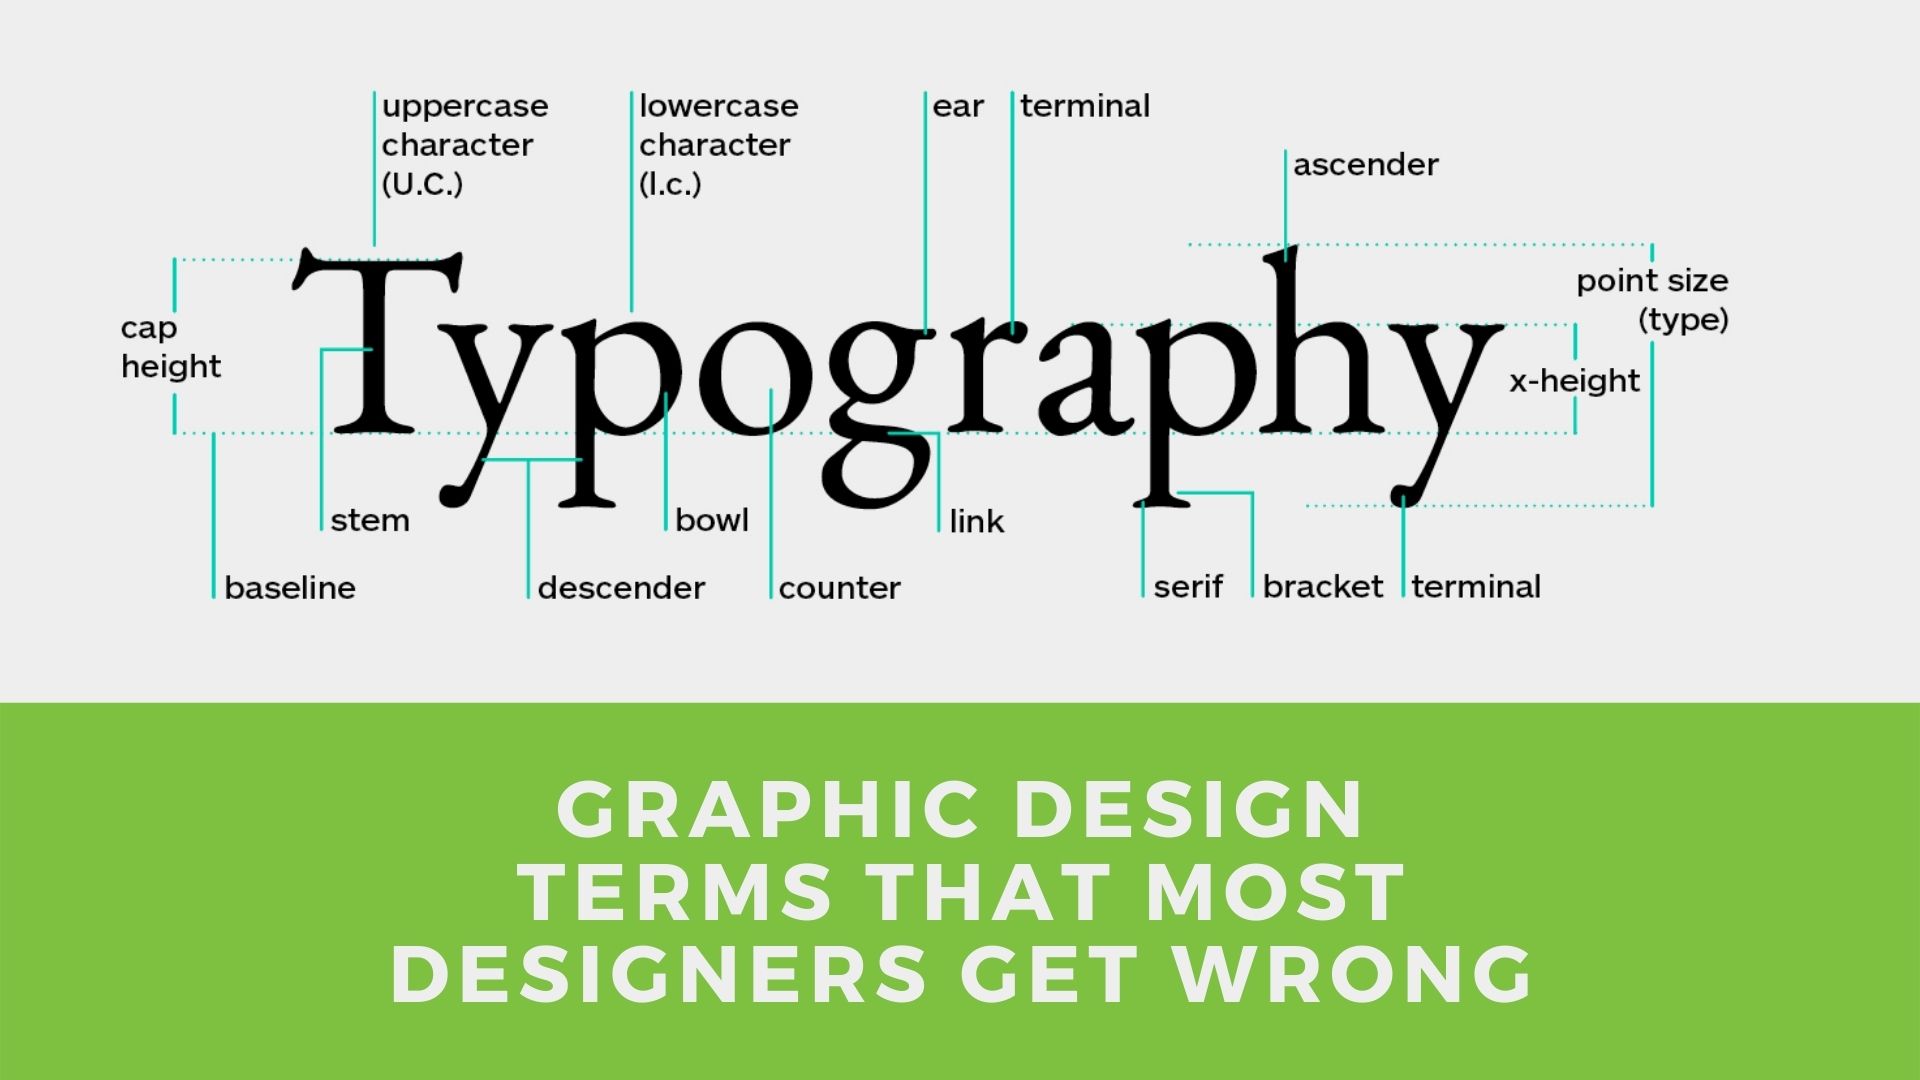 14 Graphic design terms that most designers get wrong